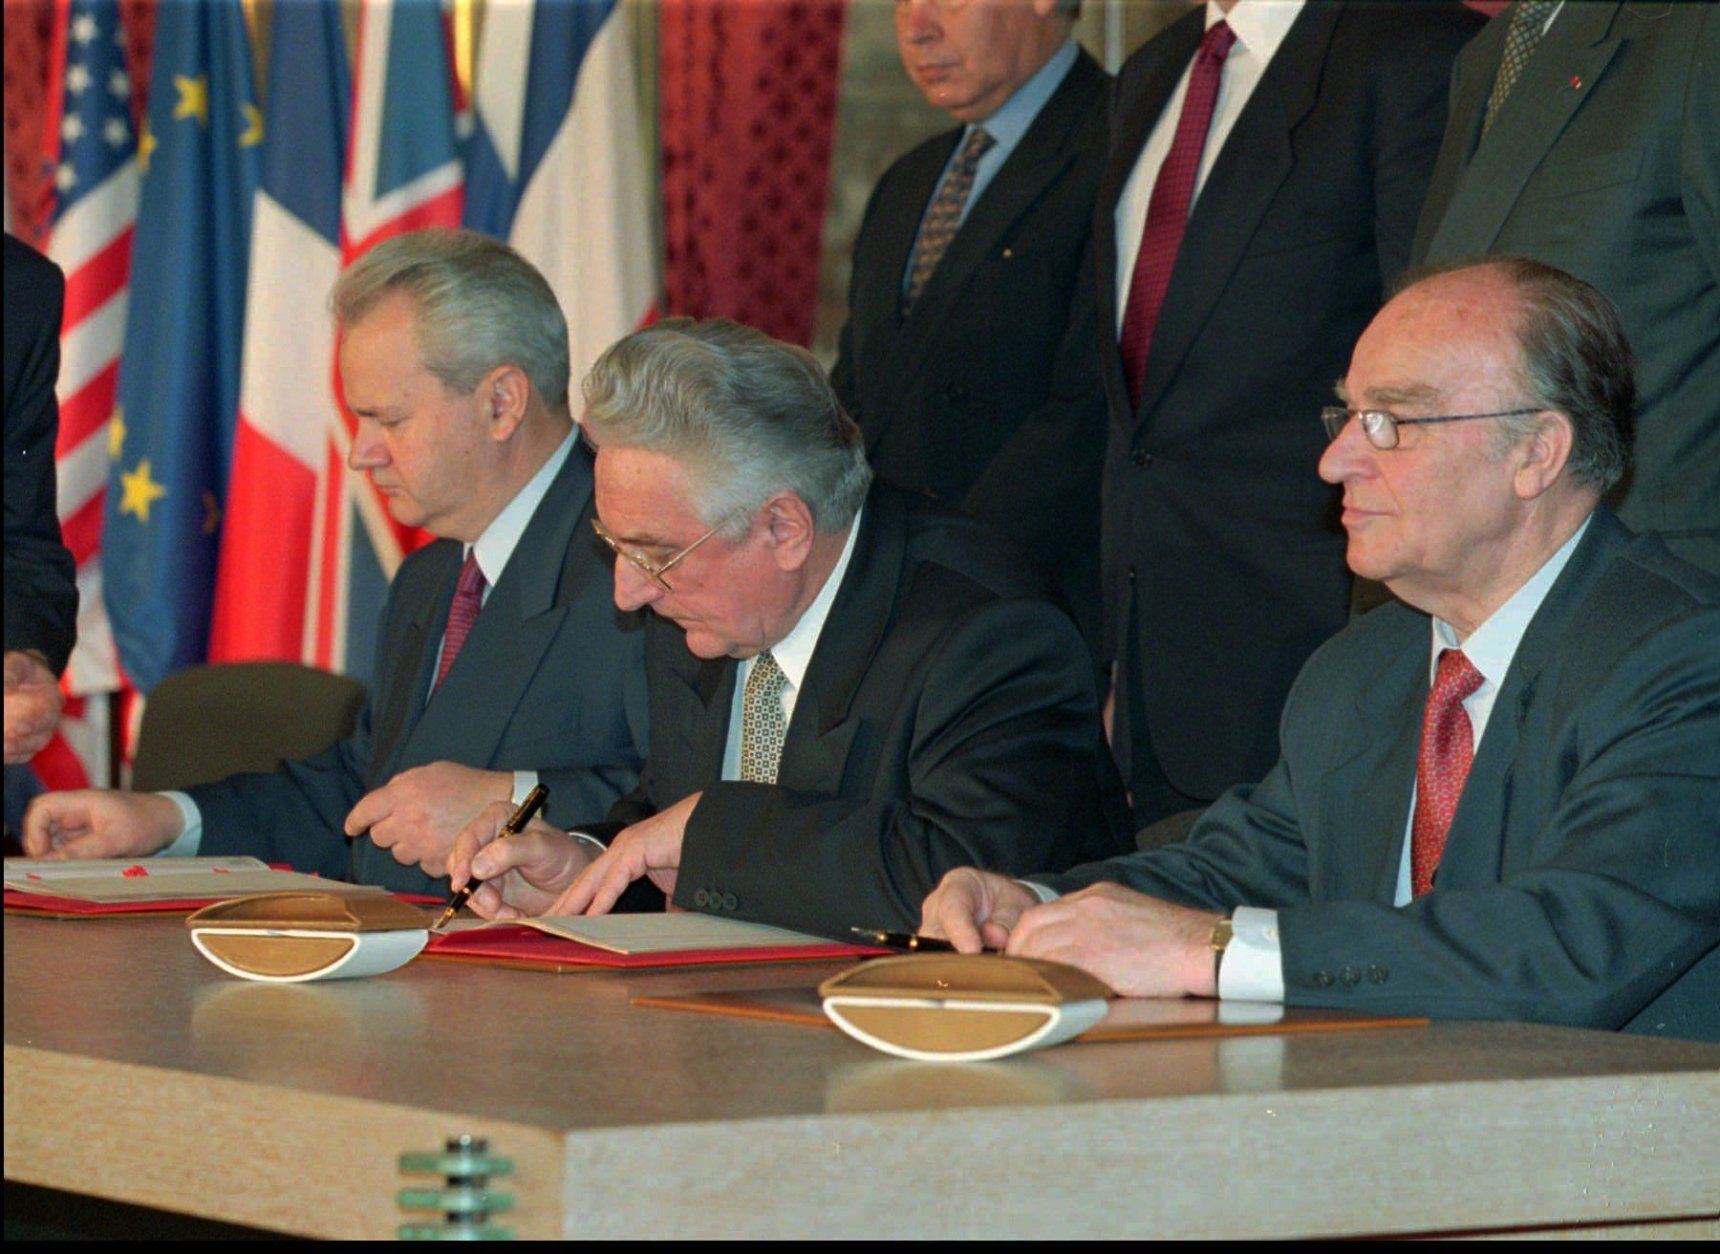 Balkan leaders from the left: Slobodan Milosevic, Serbia, Franjo Tudjman, Croatia, and Alija Izetbegovic, Bosnia, during the signing of the treaty to forge an end to Europe's most devastating conflict since WWII, in the Elysee Palace in Paris Thursday December 14, 1995.(AP PHOTO/Jerome Delay/pool)